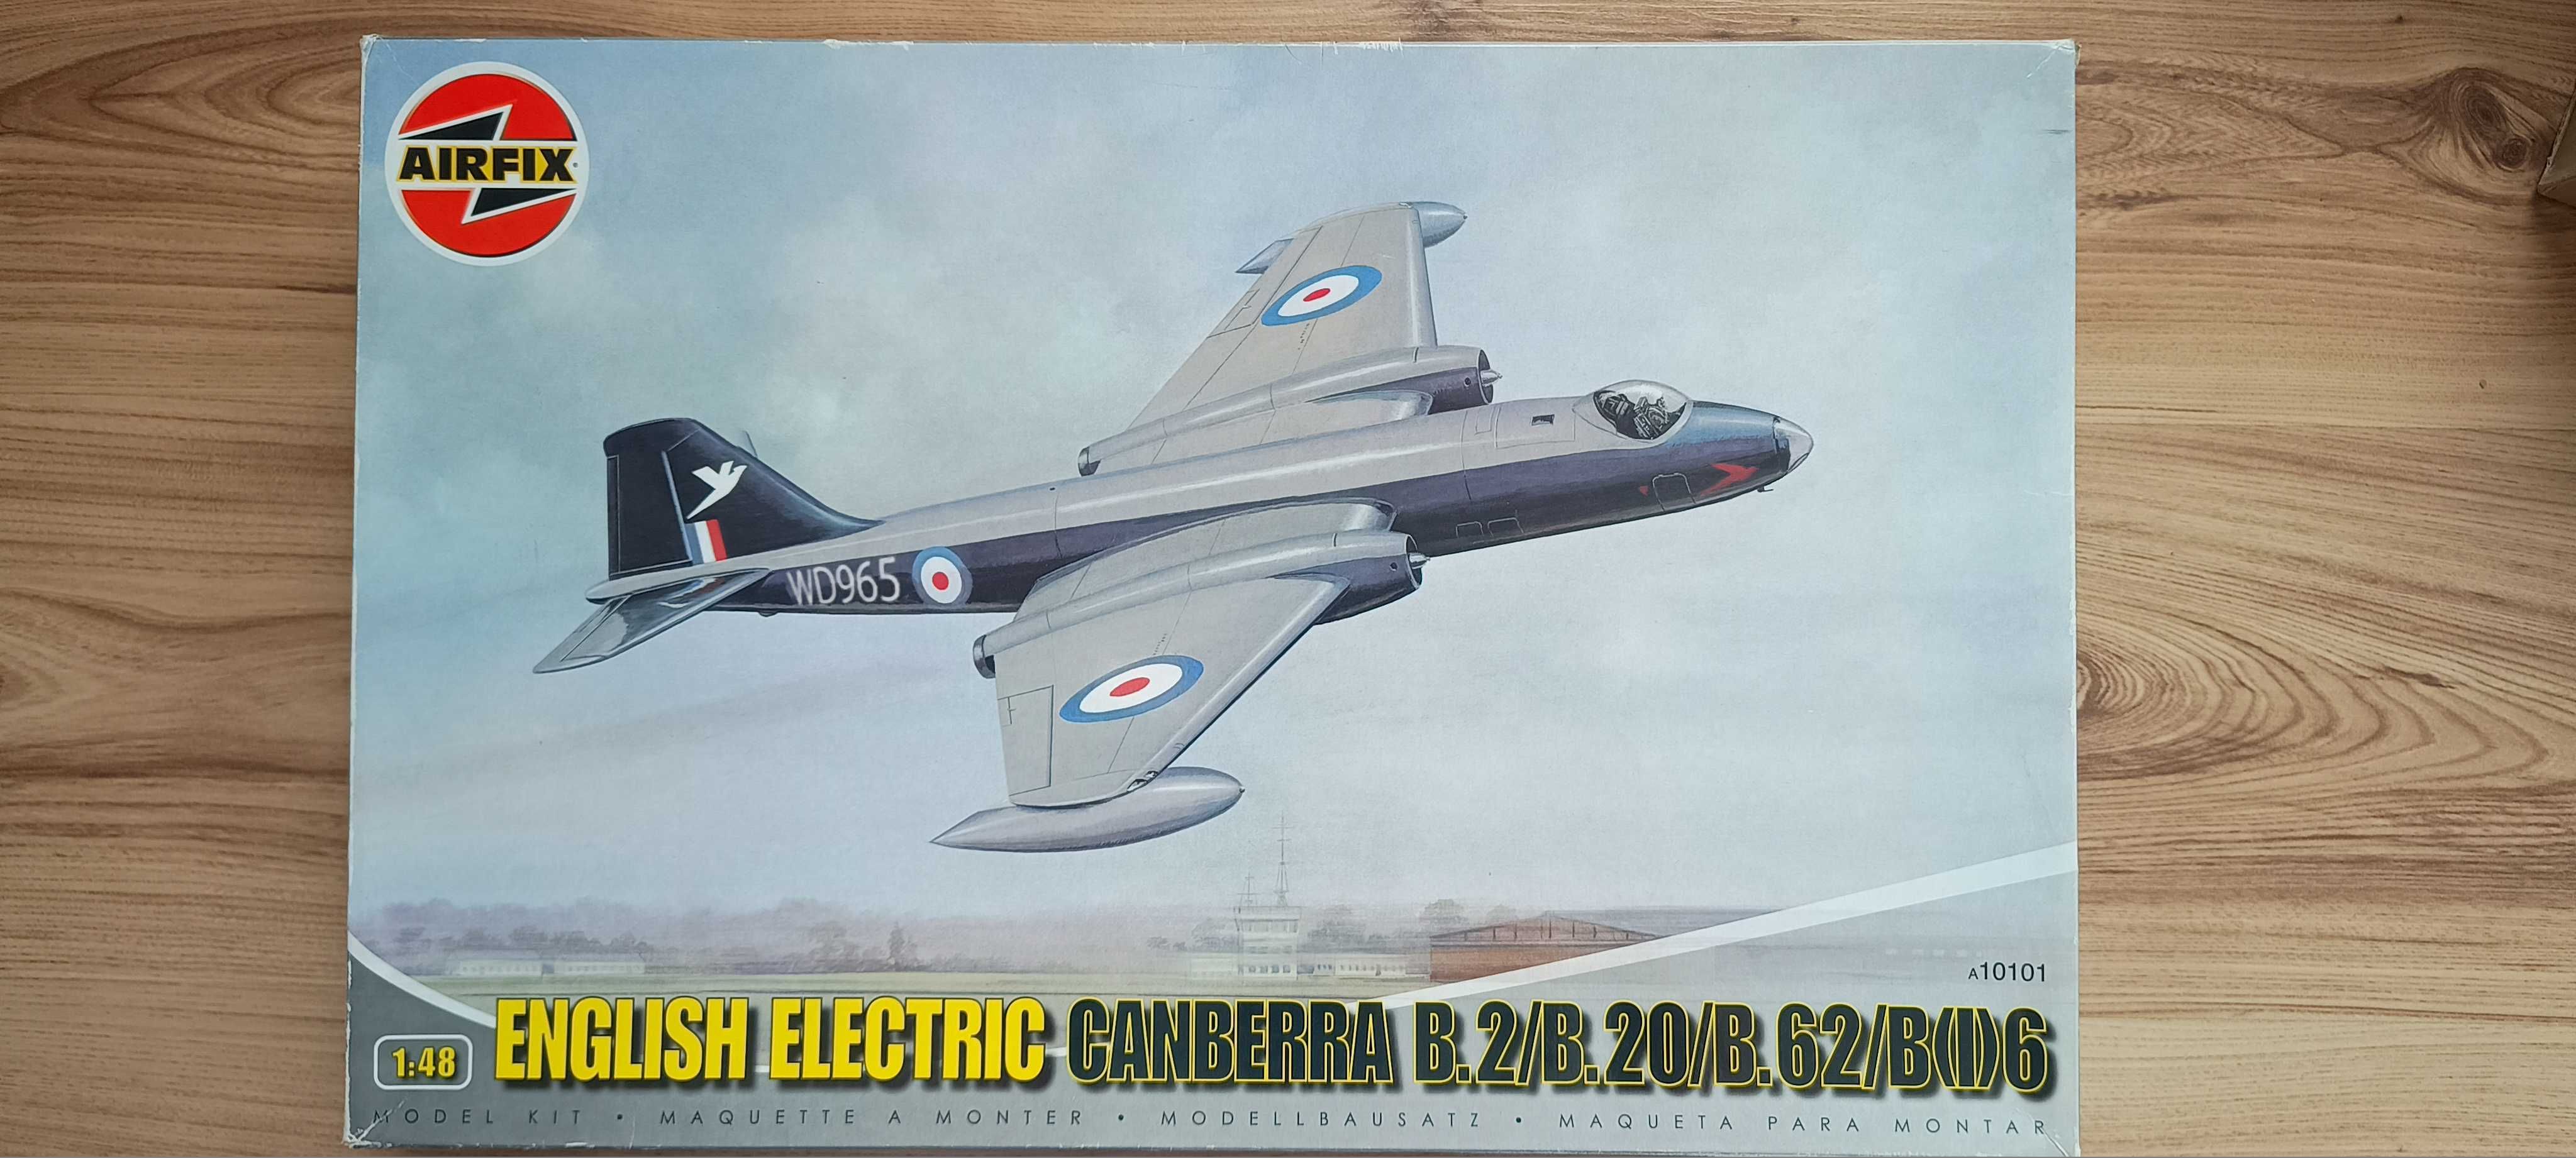 EE Canberra B , Airfix 1:48 (A10101) + Aires + Eduard + Master. Model